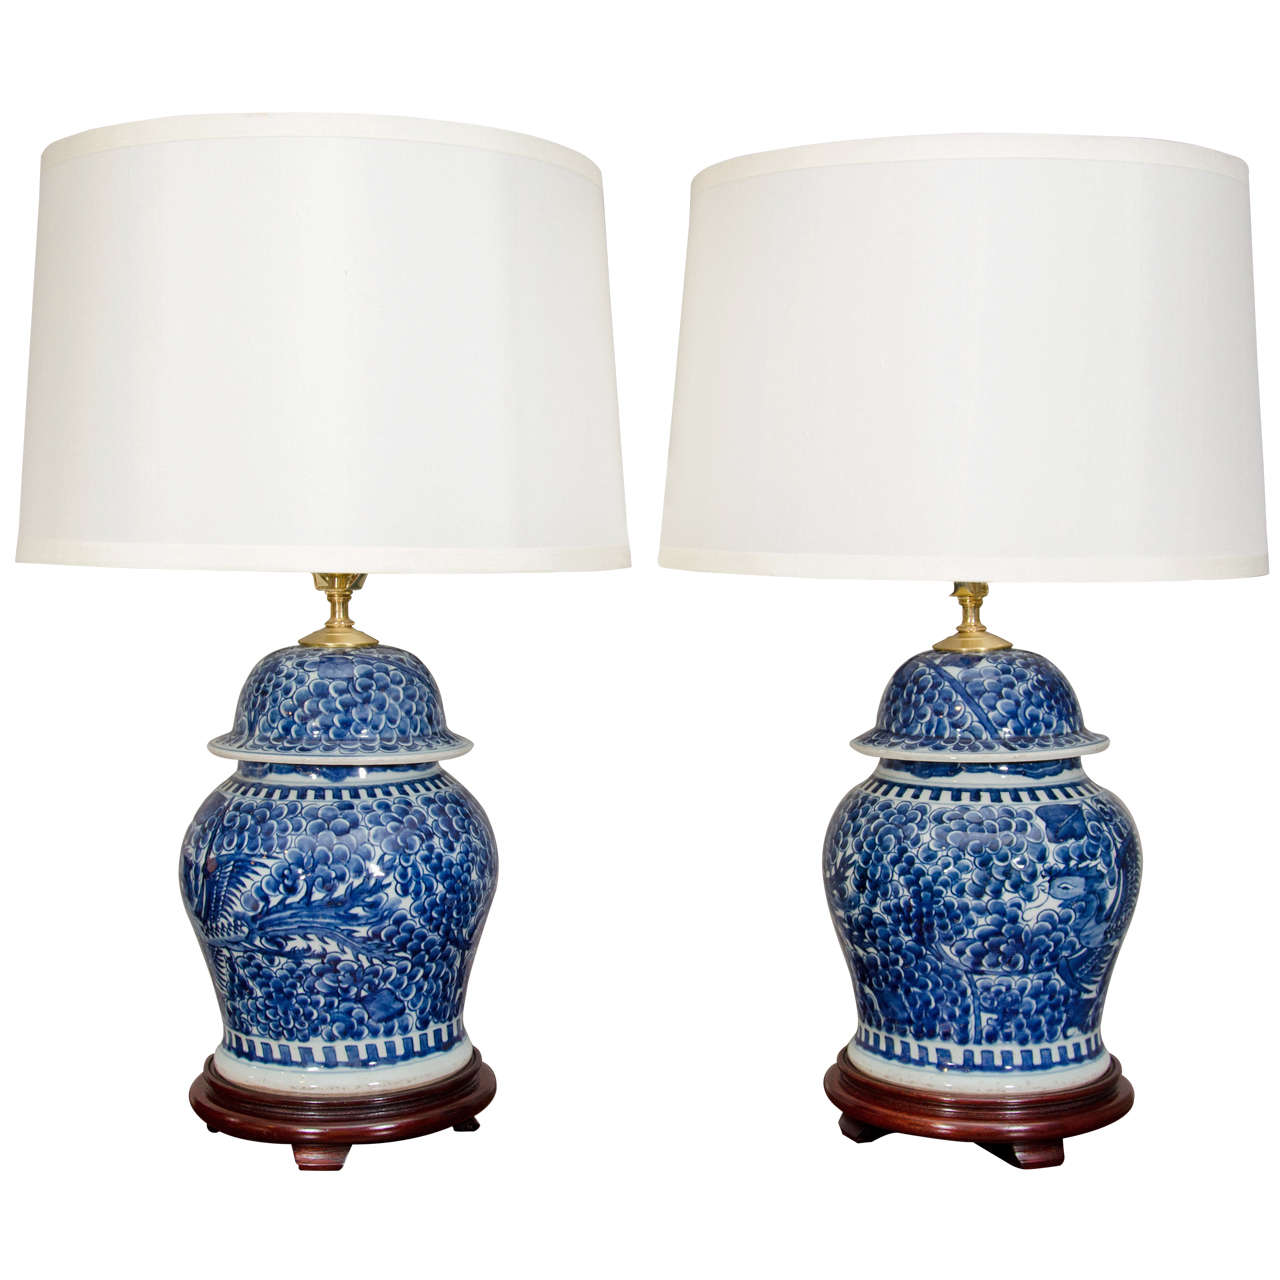 Pair Of Blue And White Porcelain Chinese Temple Jar Lamps